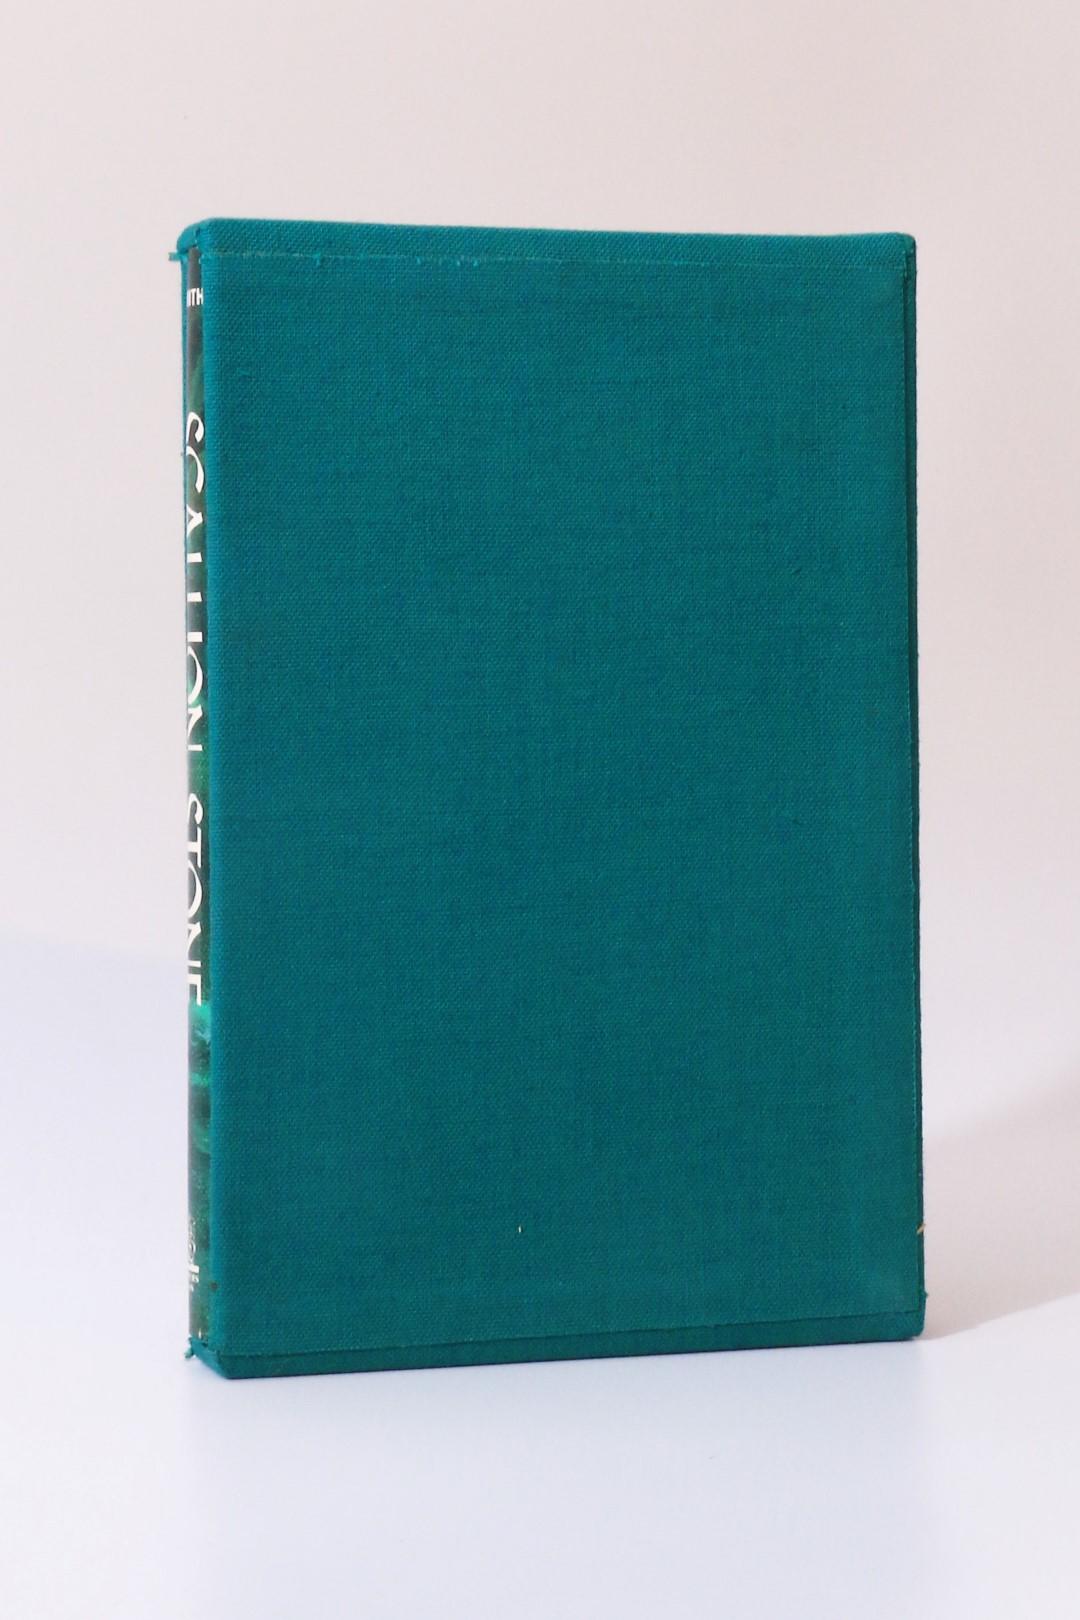 Canon Basil A. Smith - The Scallion Stone - Whispers Press, 1980, Signed Limited Edition.